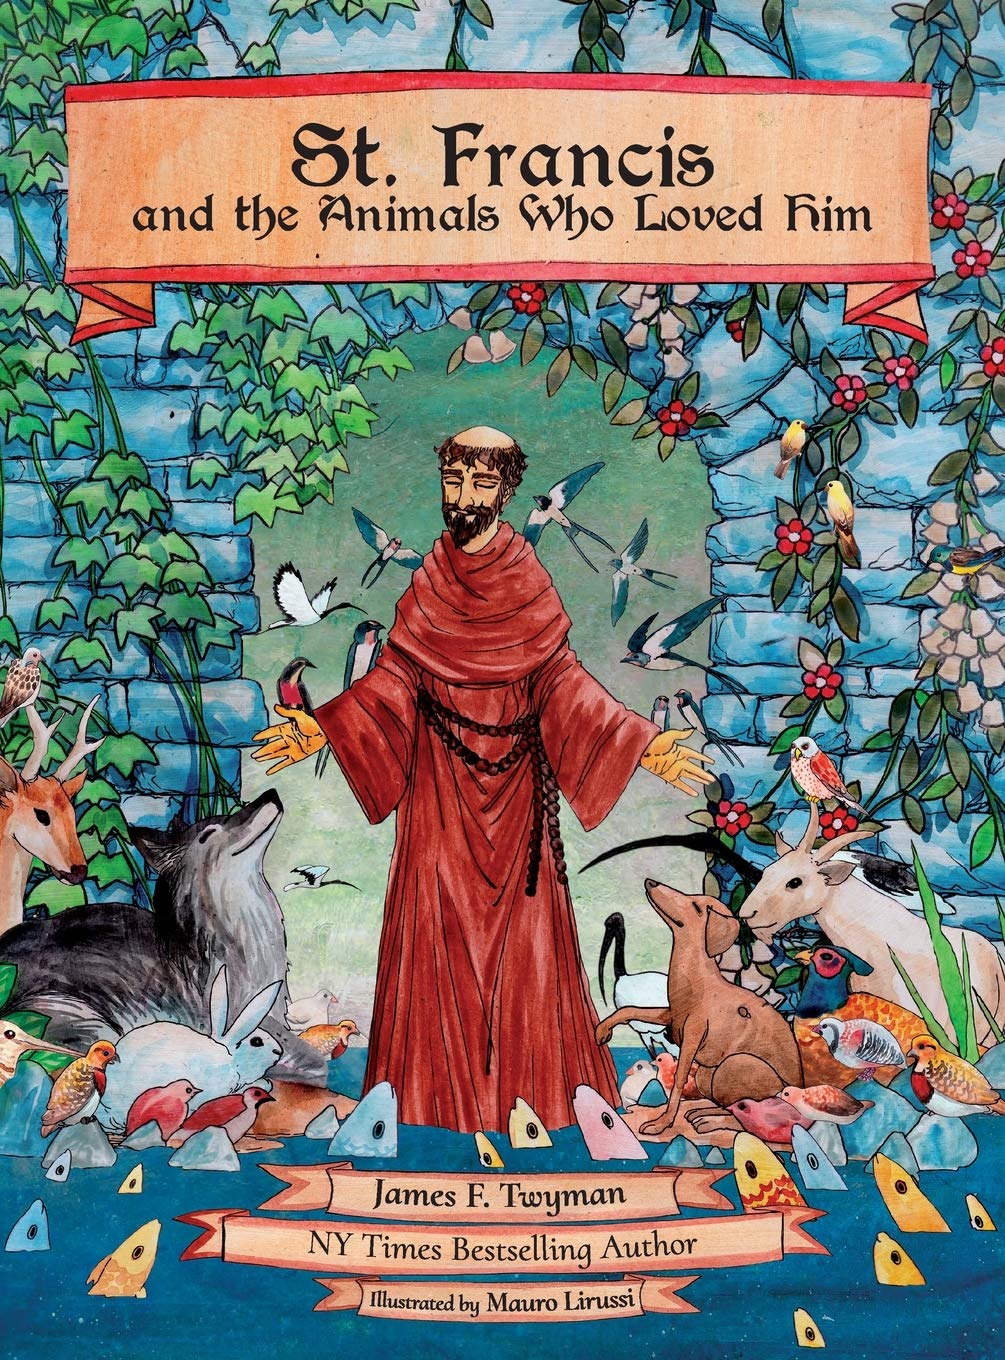 St. Francis & the Animals Who Loved Him